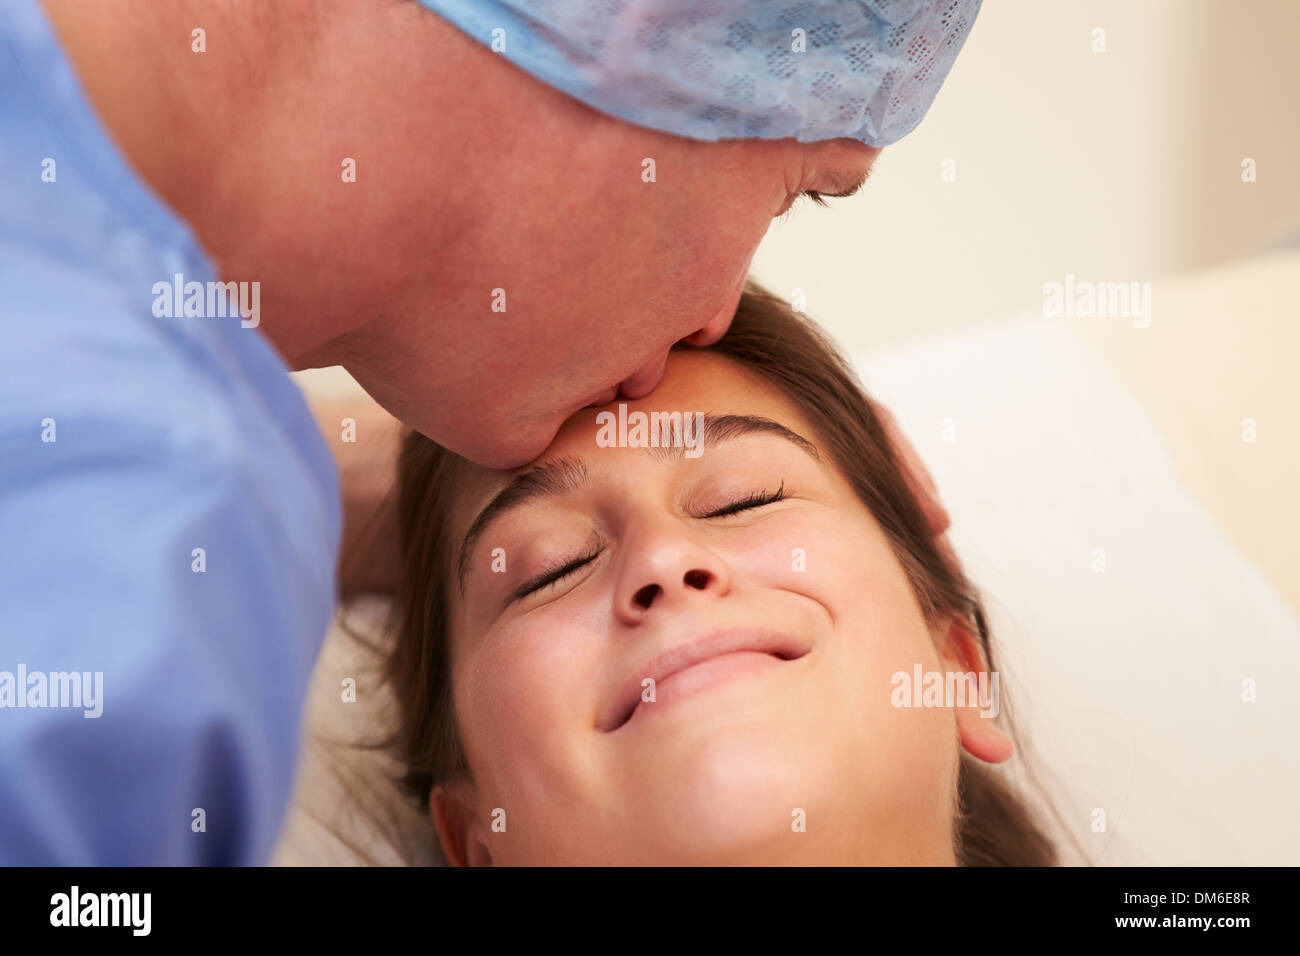 Husband Supporting Wife Through IVF Treatment Stock Photo